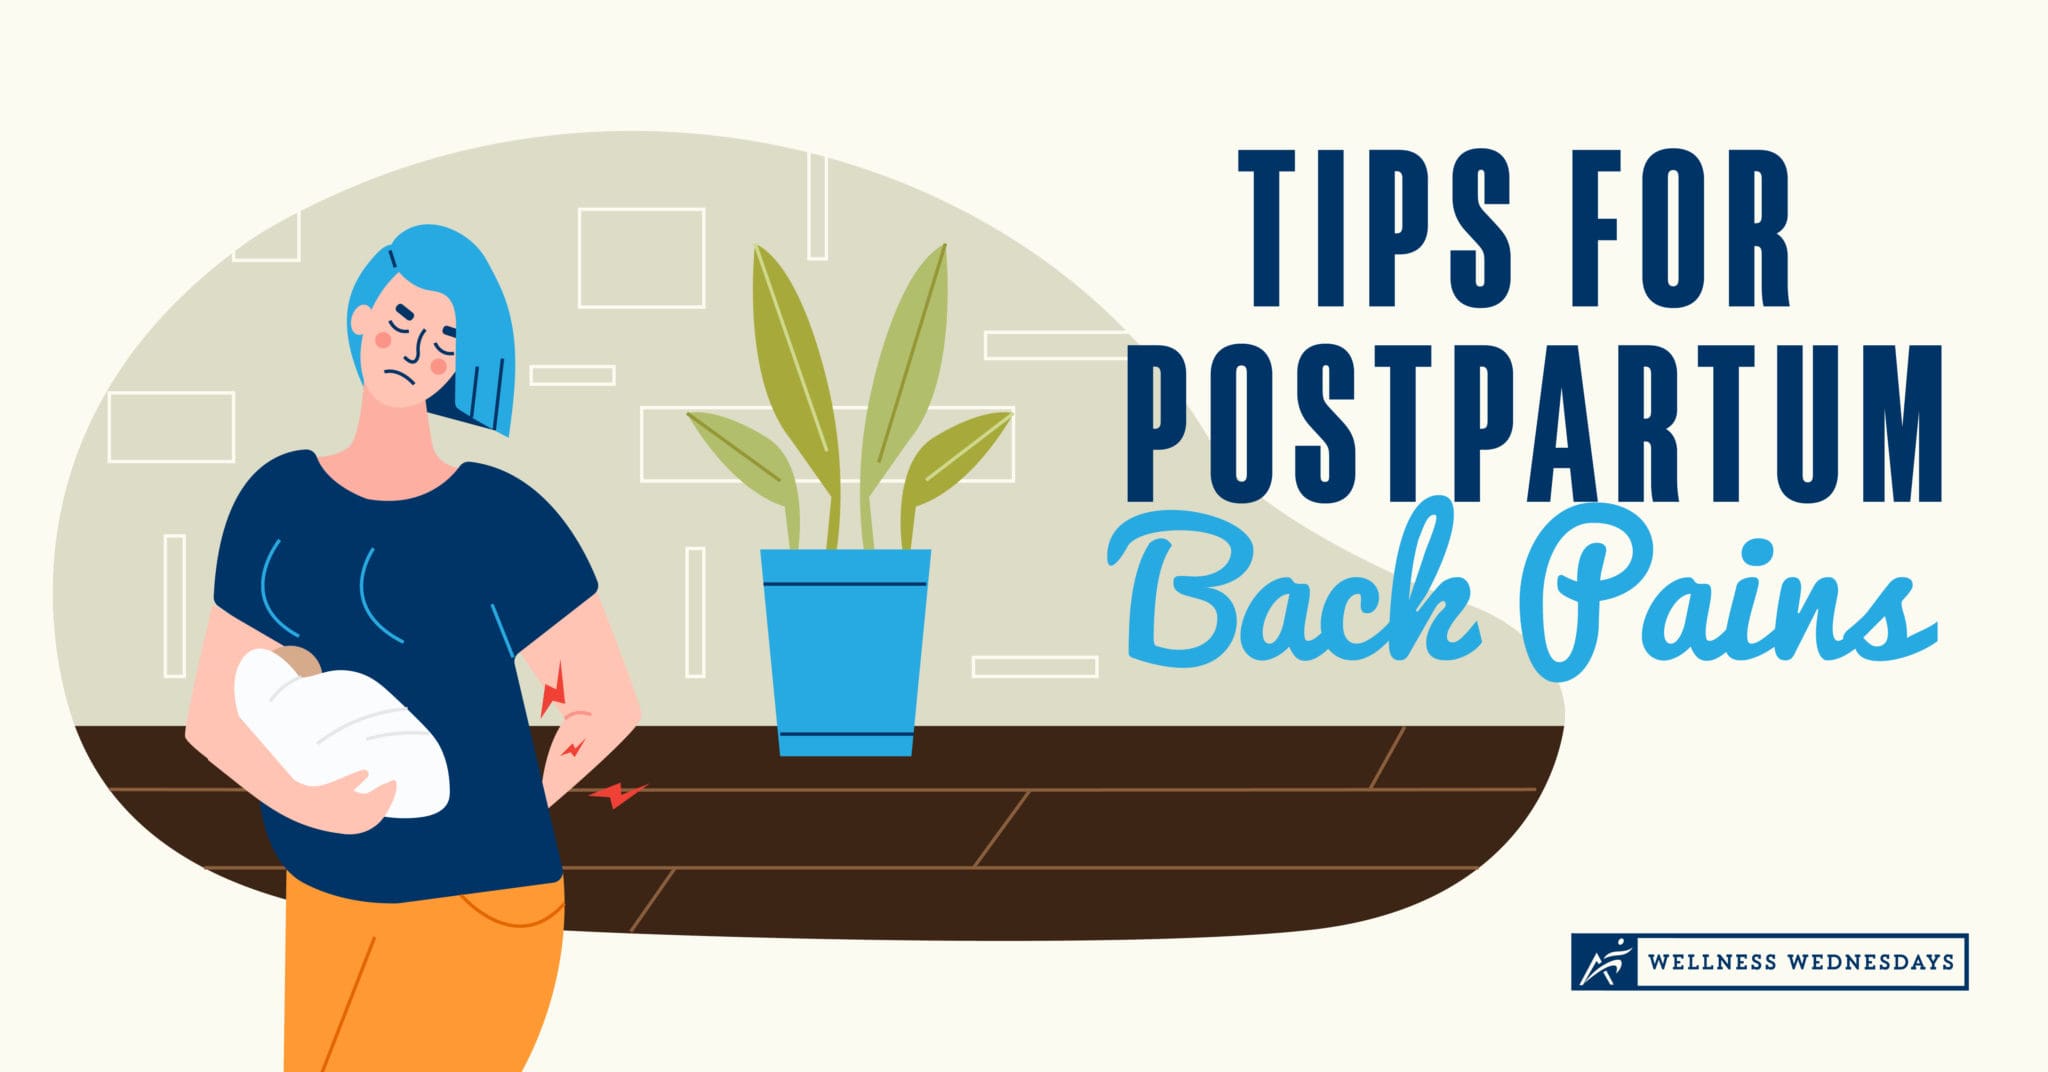 10 Things to Aid Postpartum Recovery